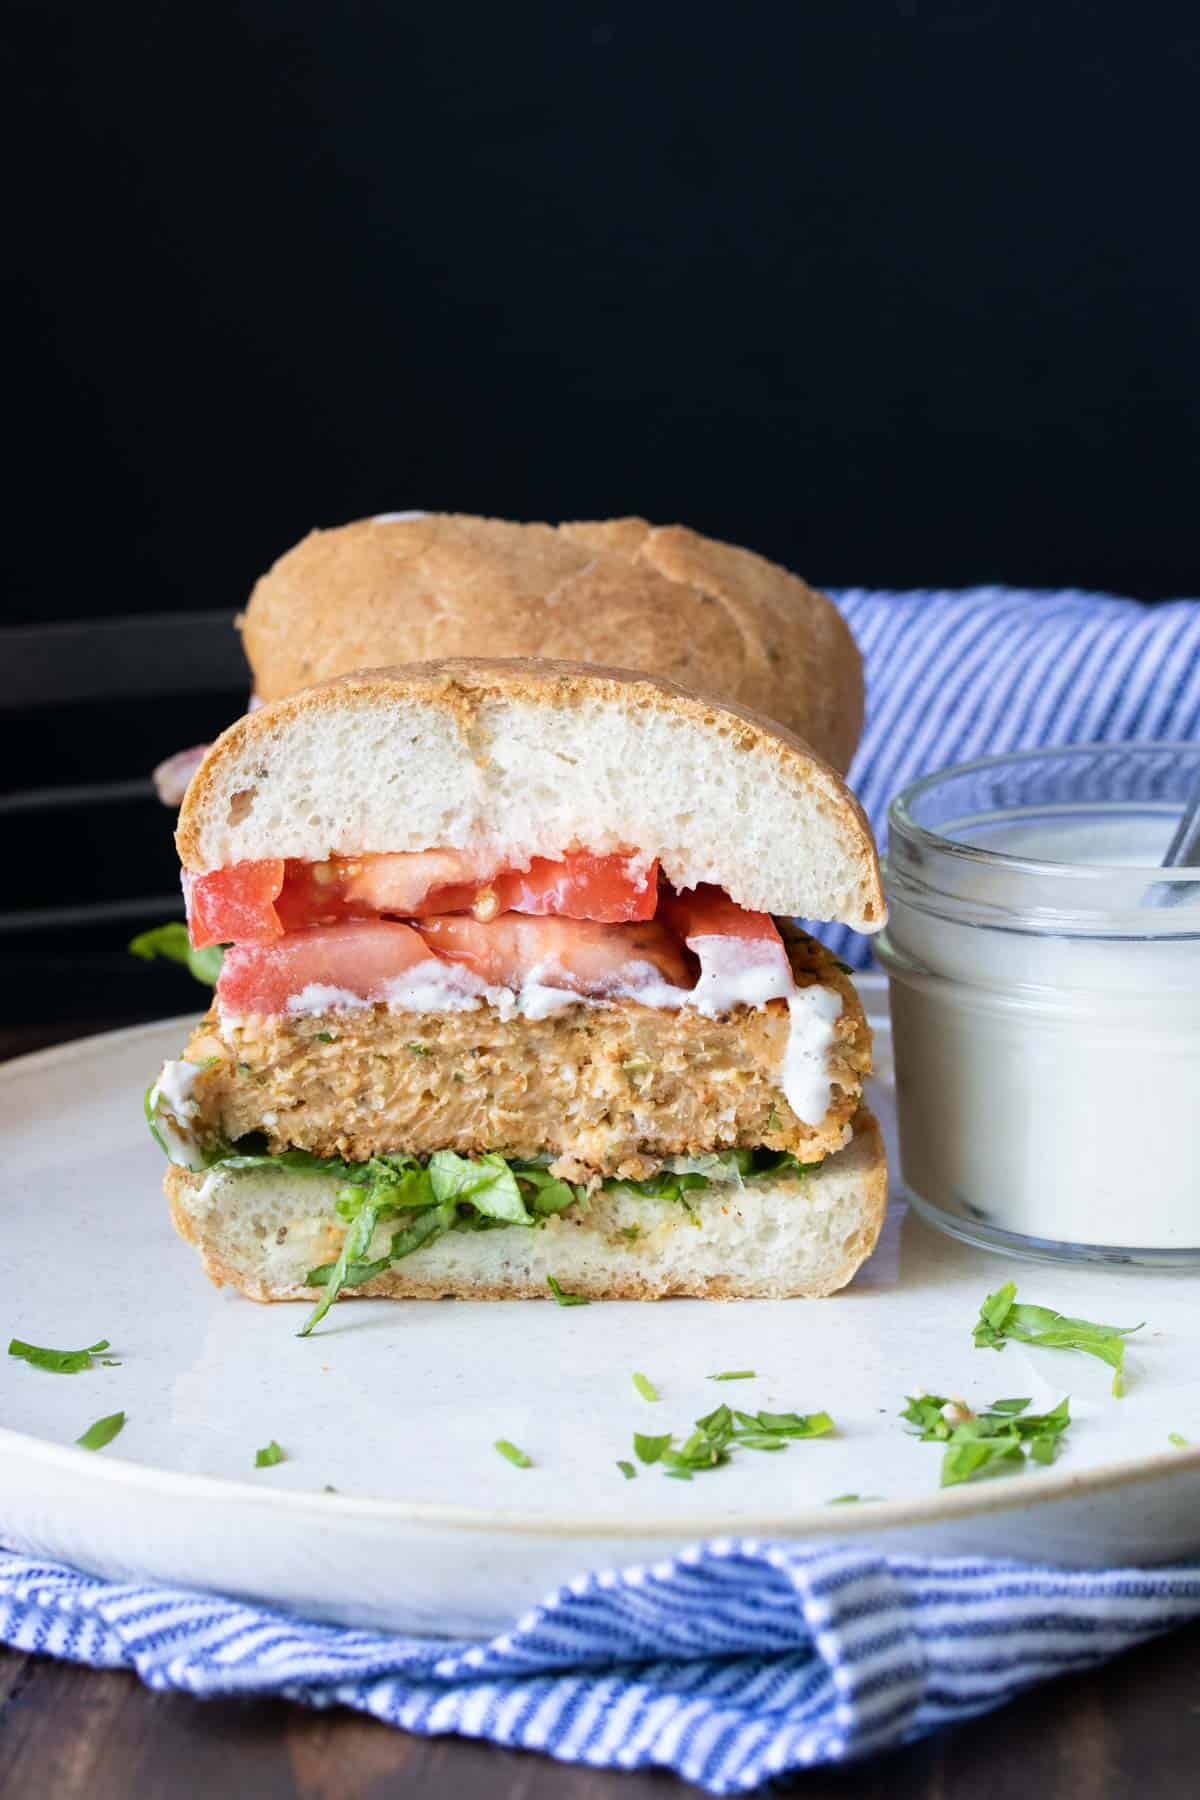 Half of a chickpea burger with lettuce, tomato and dripping sauce